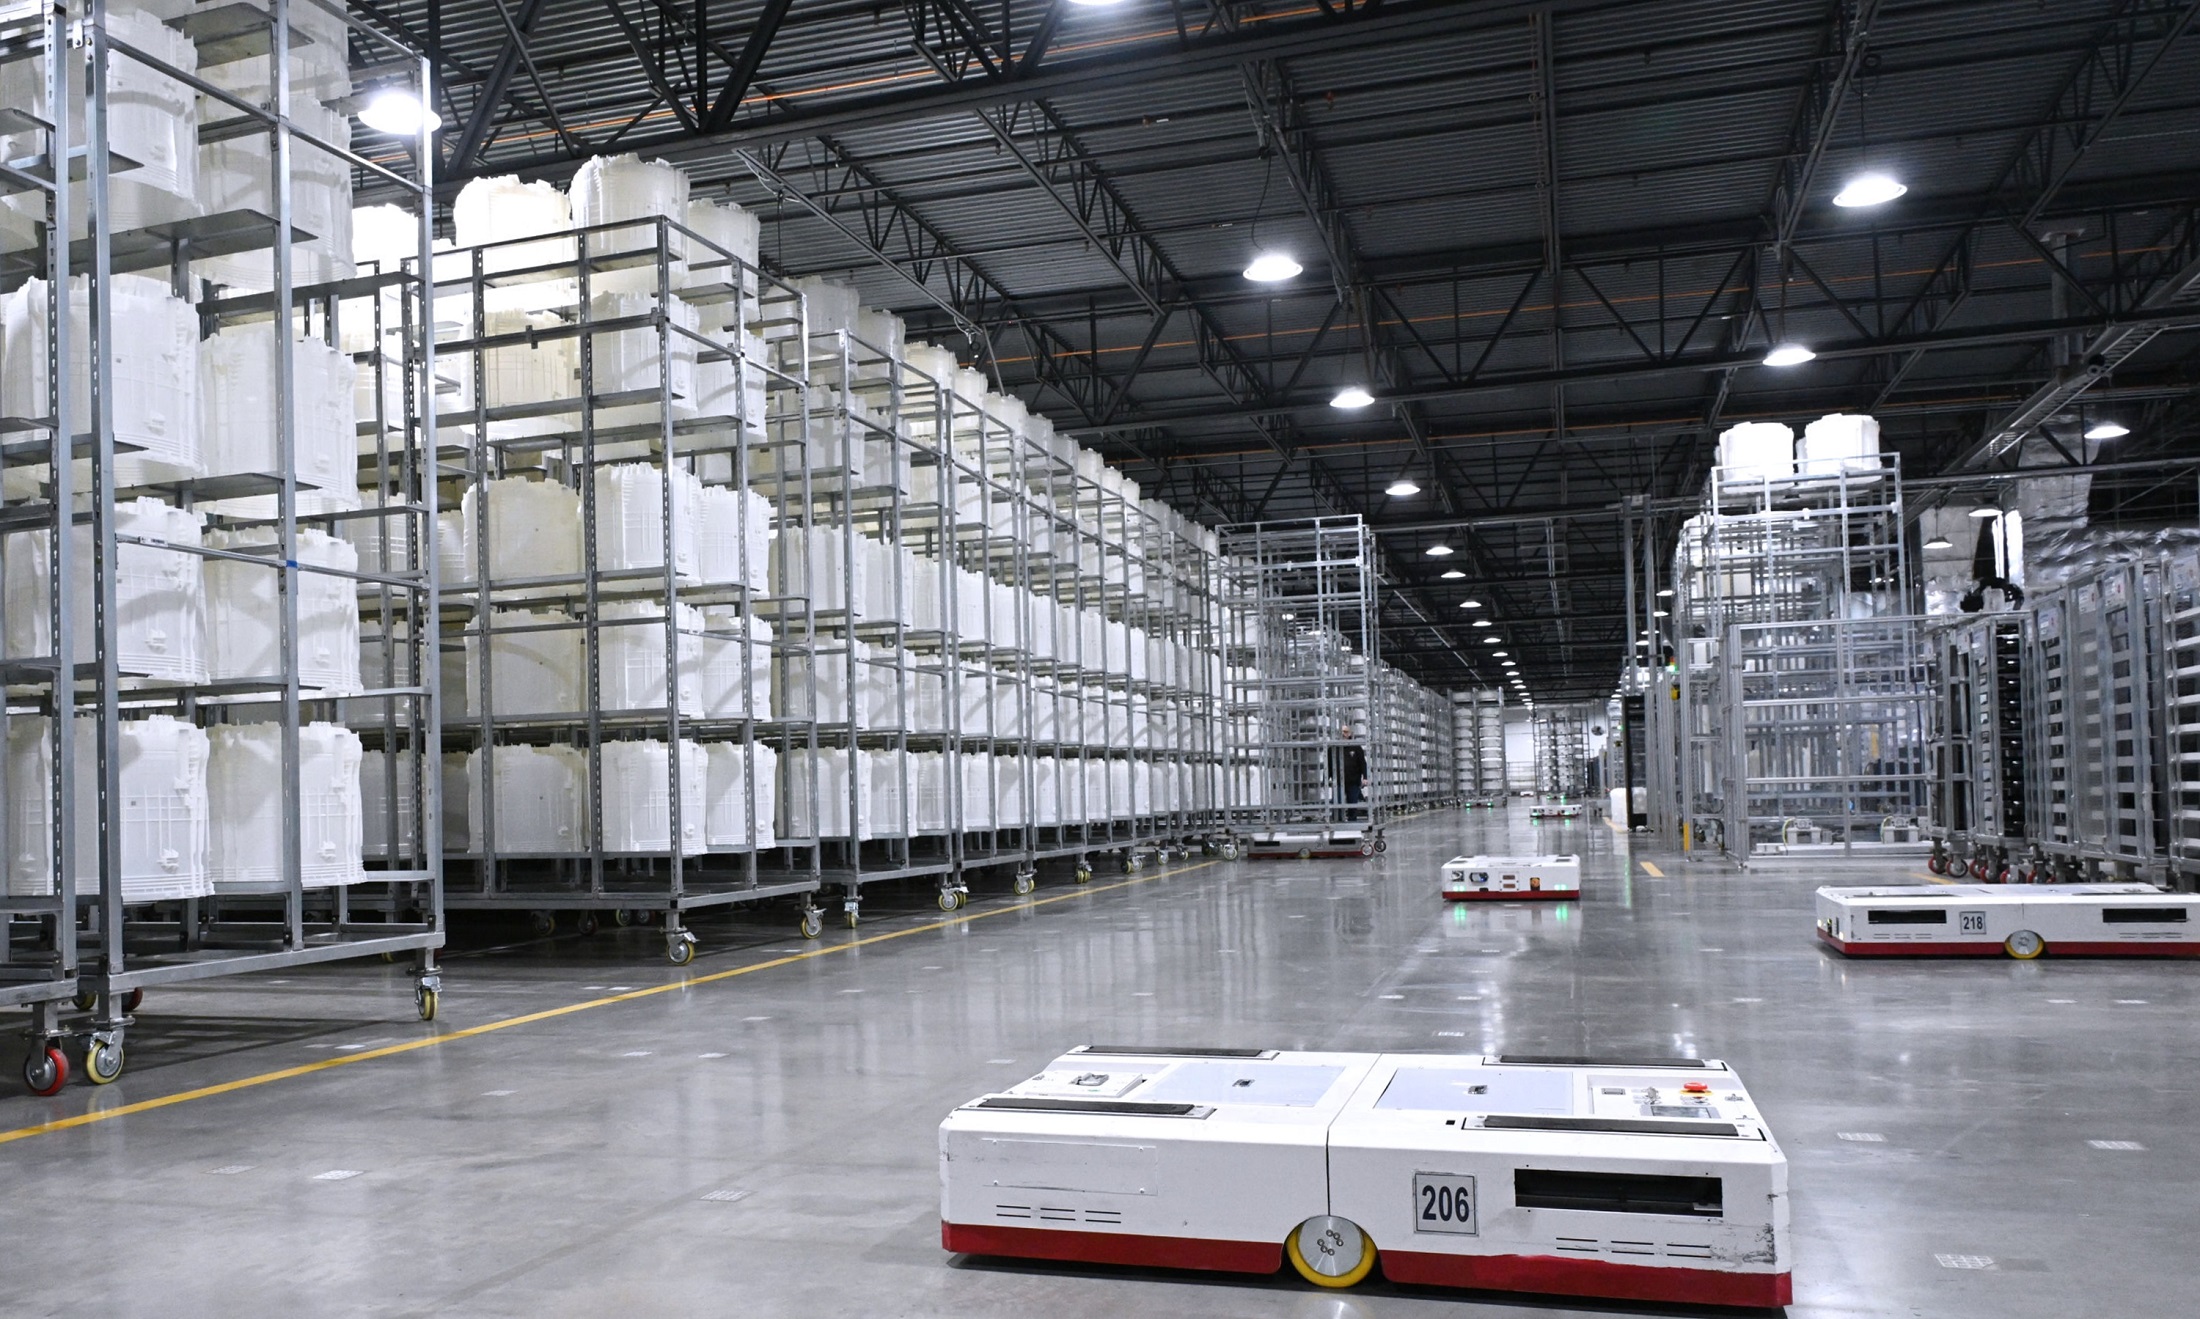 In the LG Tennessee factory, automated guided vehicles (AGVs) transport parts around the plant